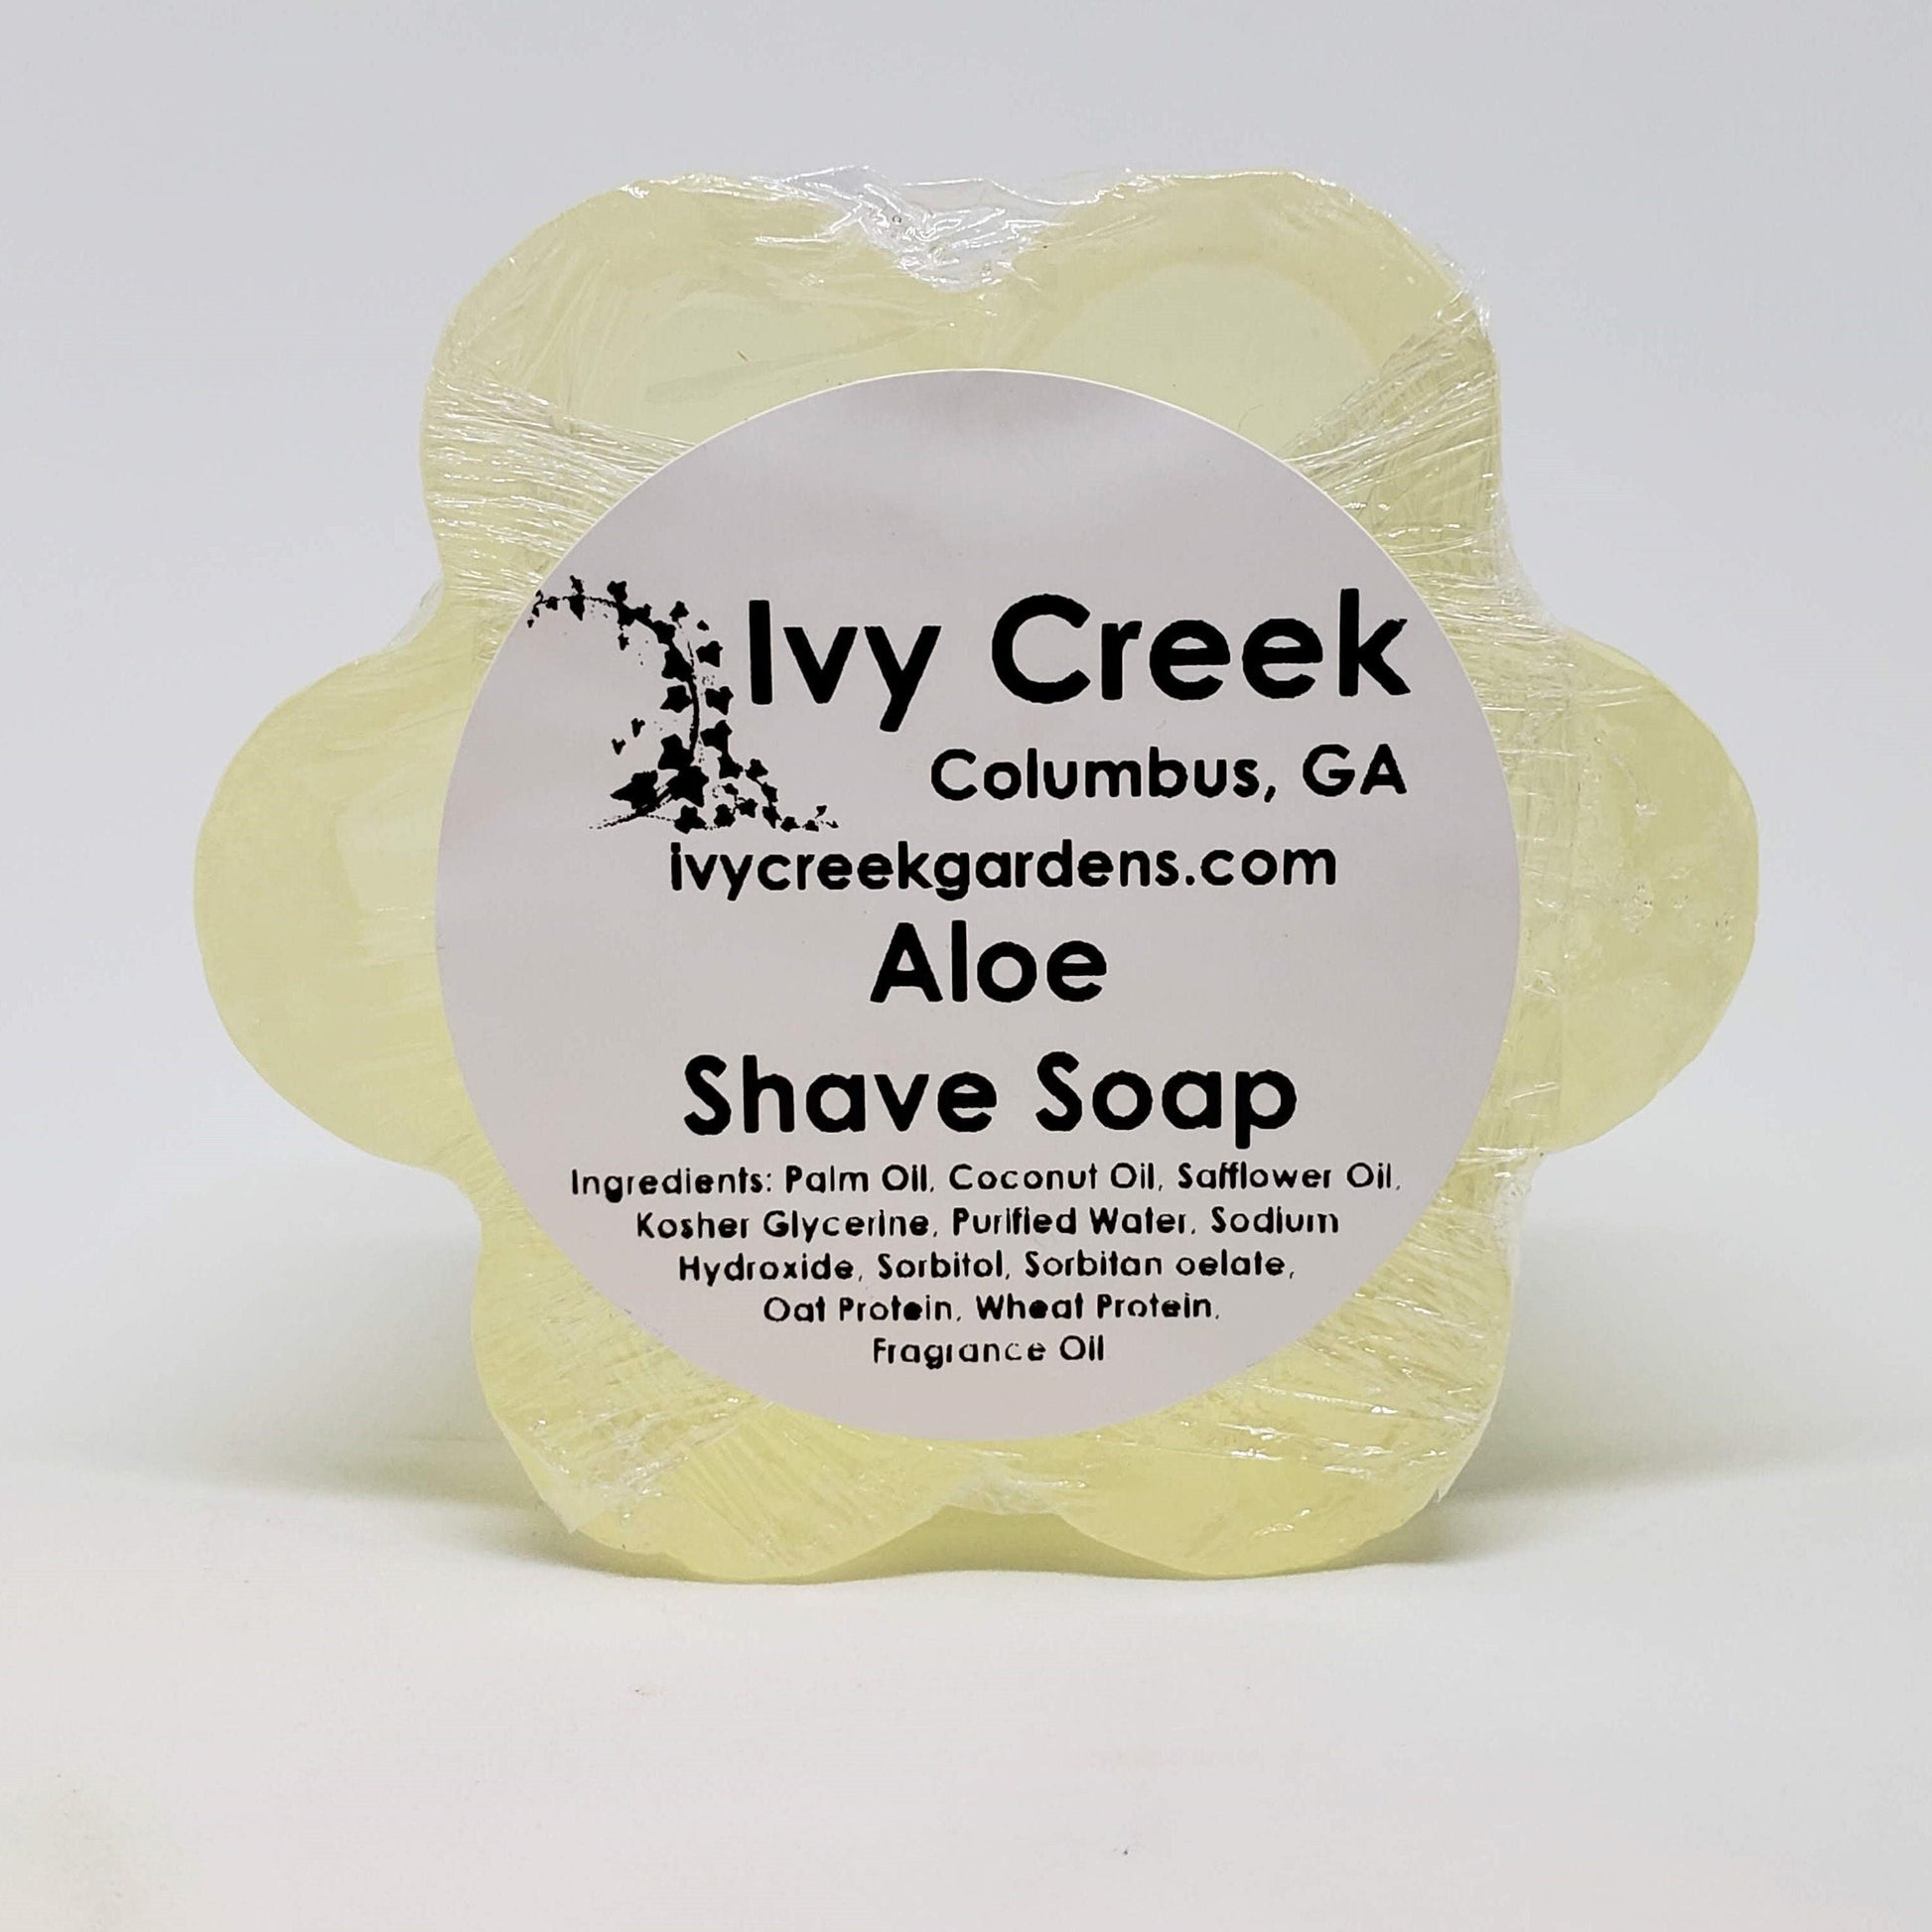 Ivy Creek Aloe Shave Soap | Glycerin Shave Soap | Perfect Shave | Soothing and Nourishing with Aloe | Vegan, Natural, Cruelty-Free | 3.5 oz